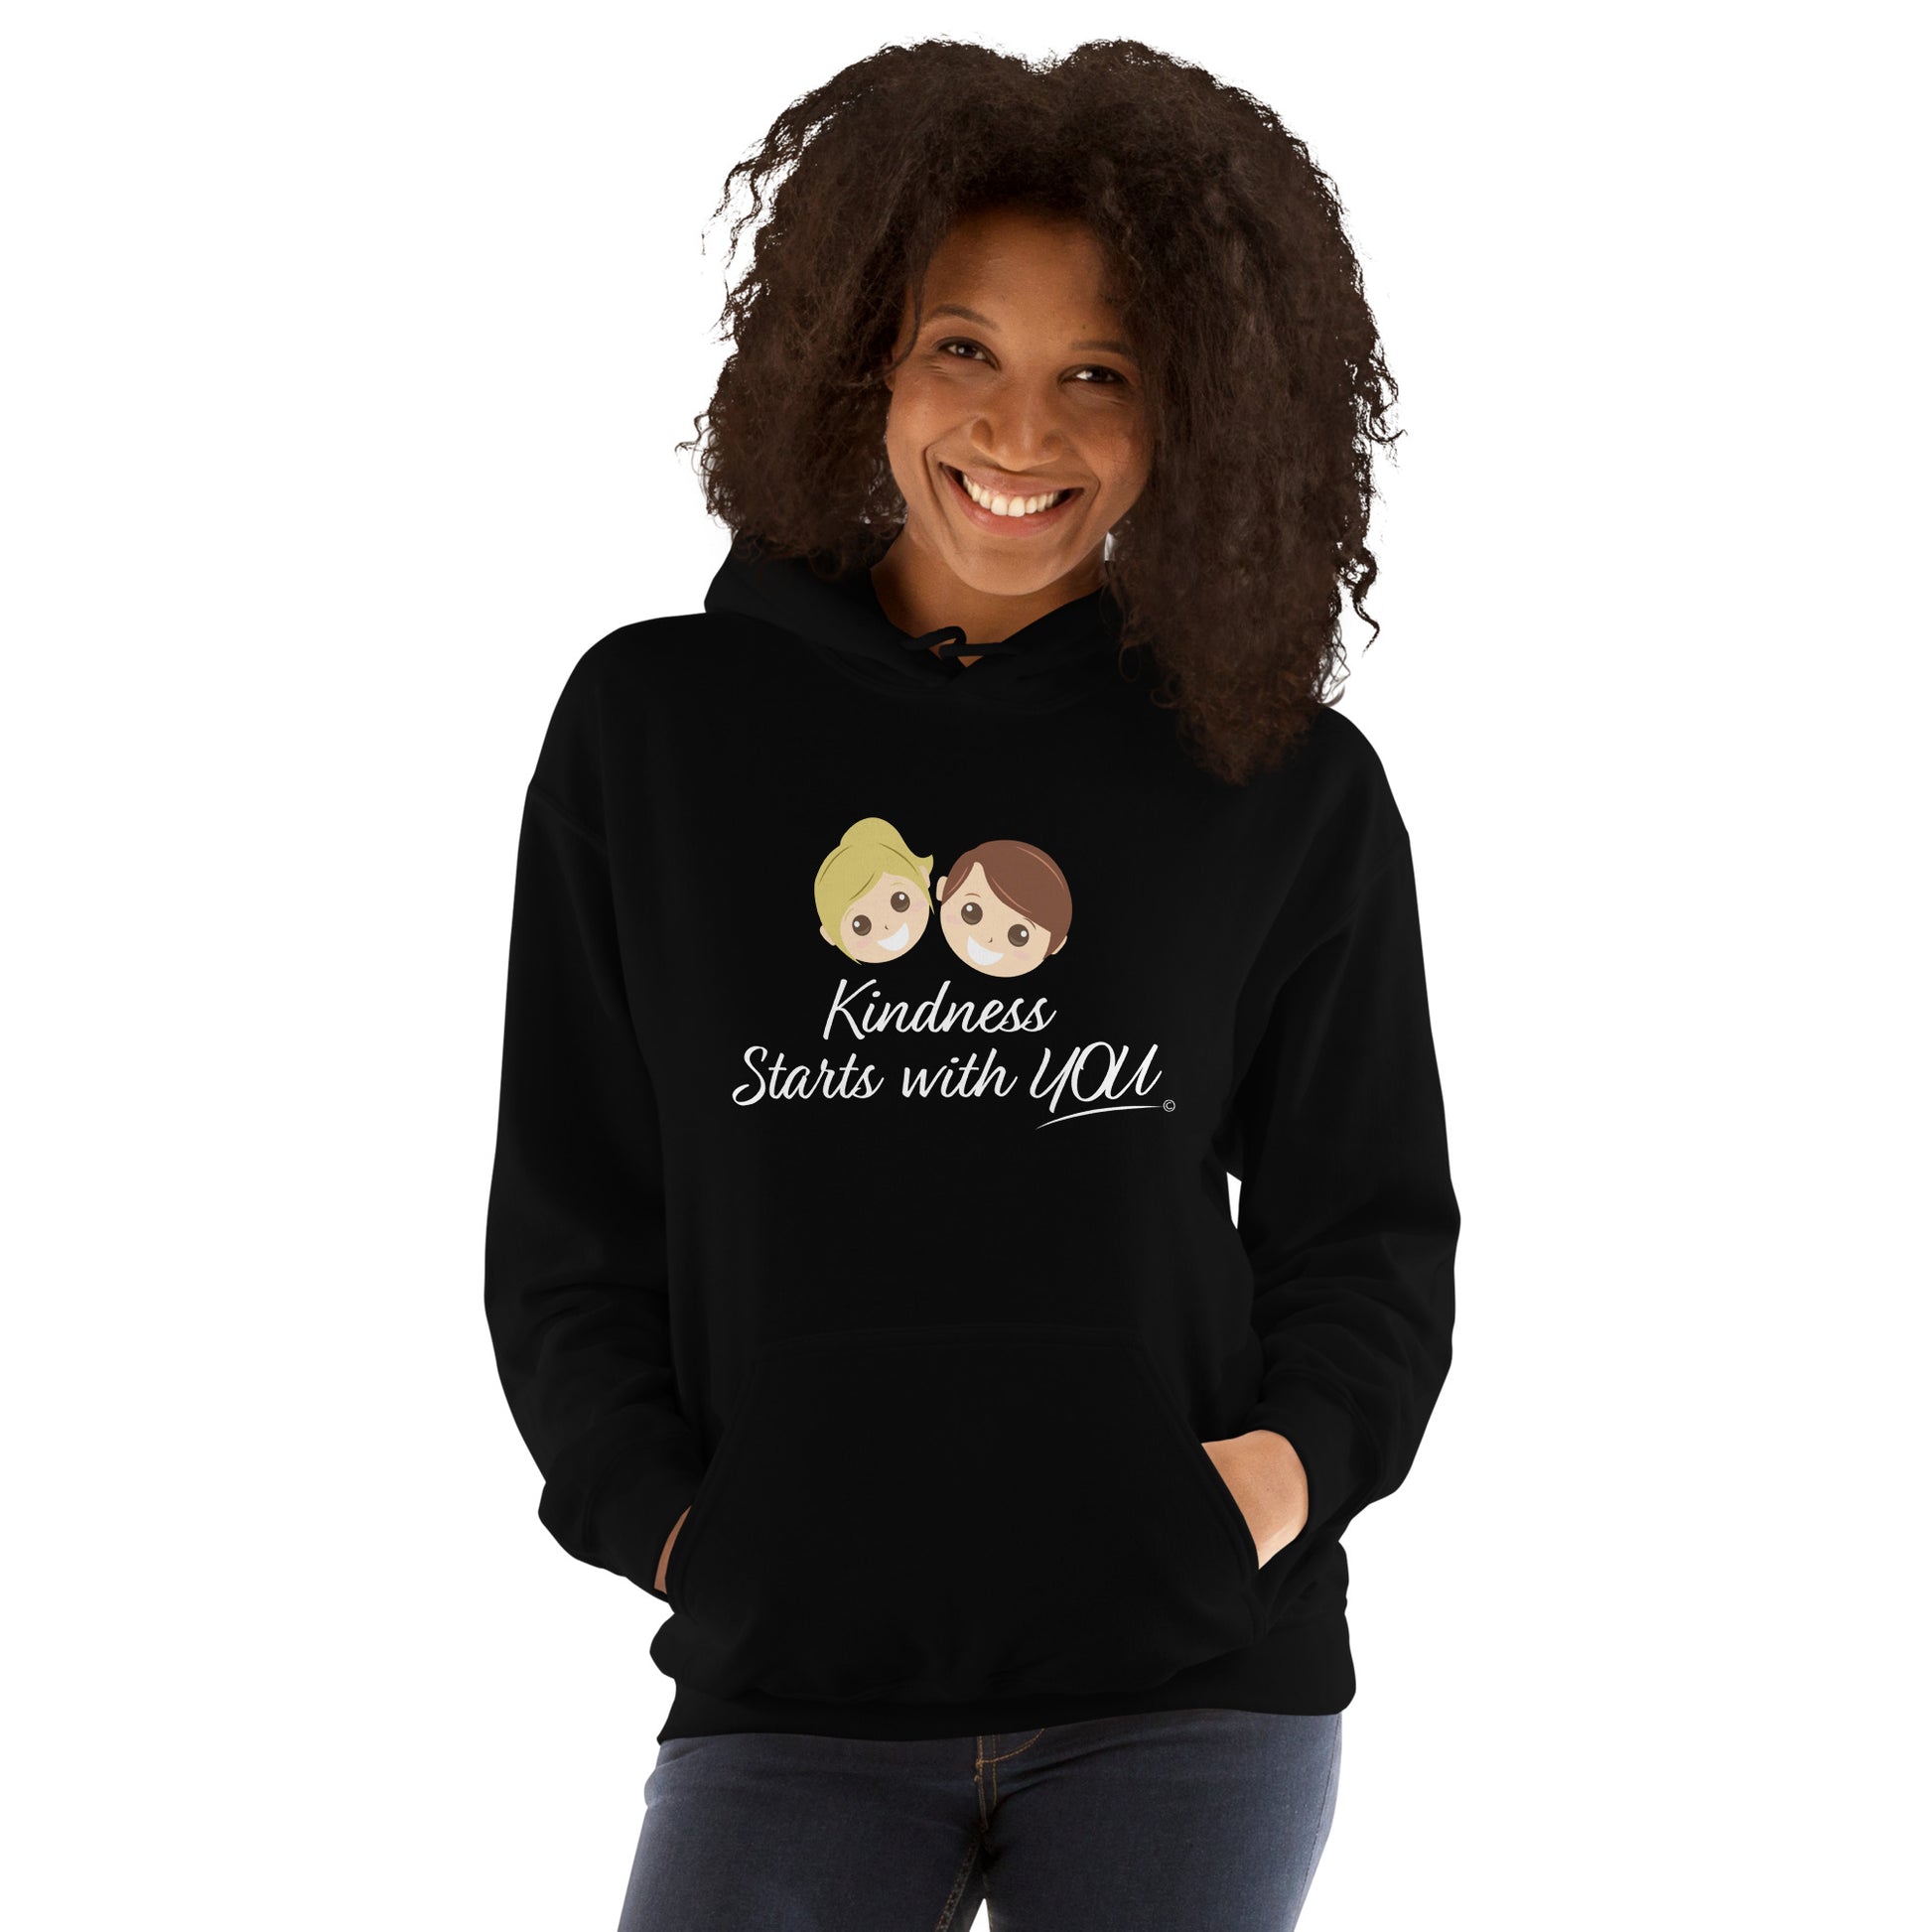 A confident woman modeling a cozy unisex hoodie in black, featuring the uplifting quote 'Kindness Starts with You' in bold lettering.